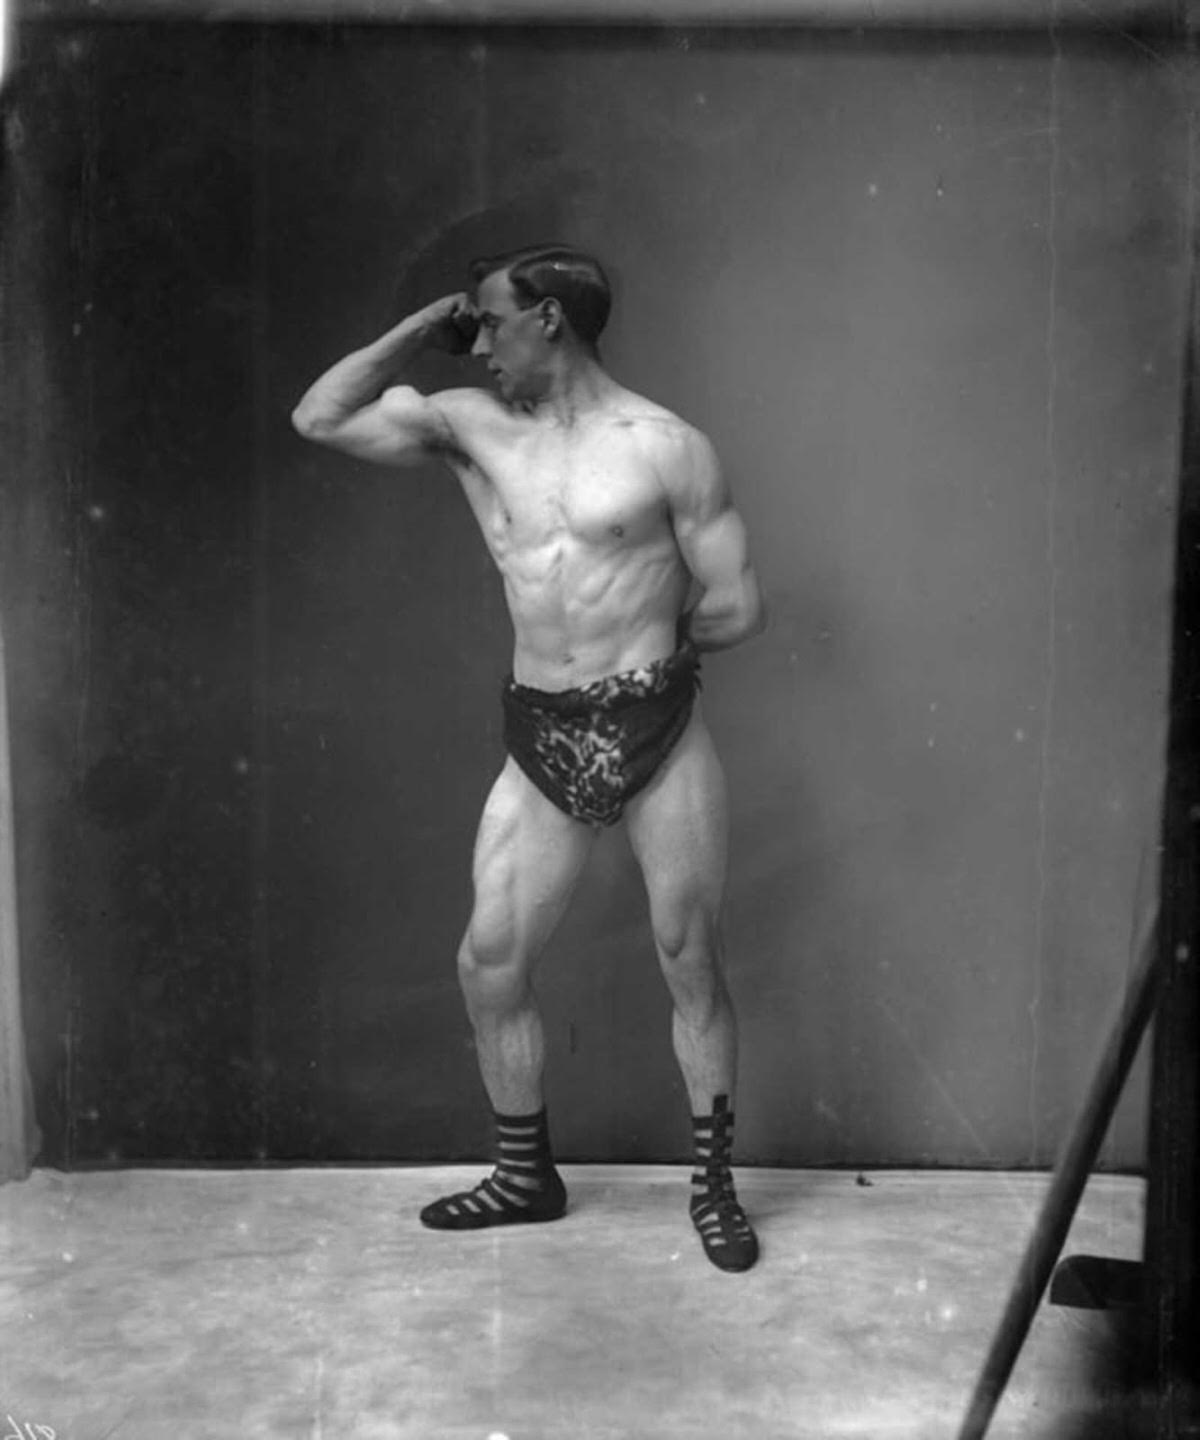 A bodybuilder known as Mr. Eggleton, the manager of Sandows physical school in 1905.